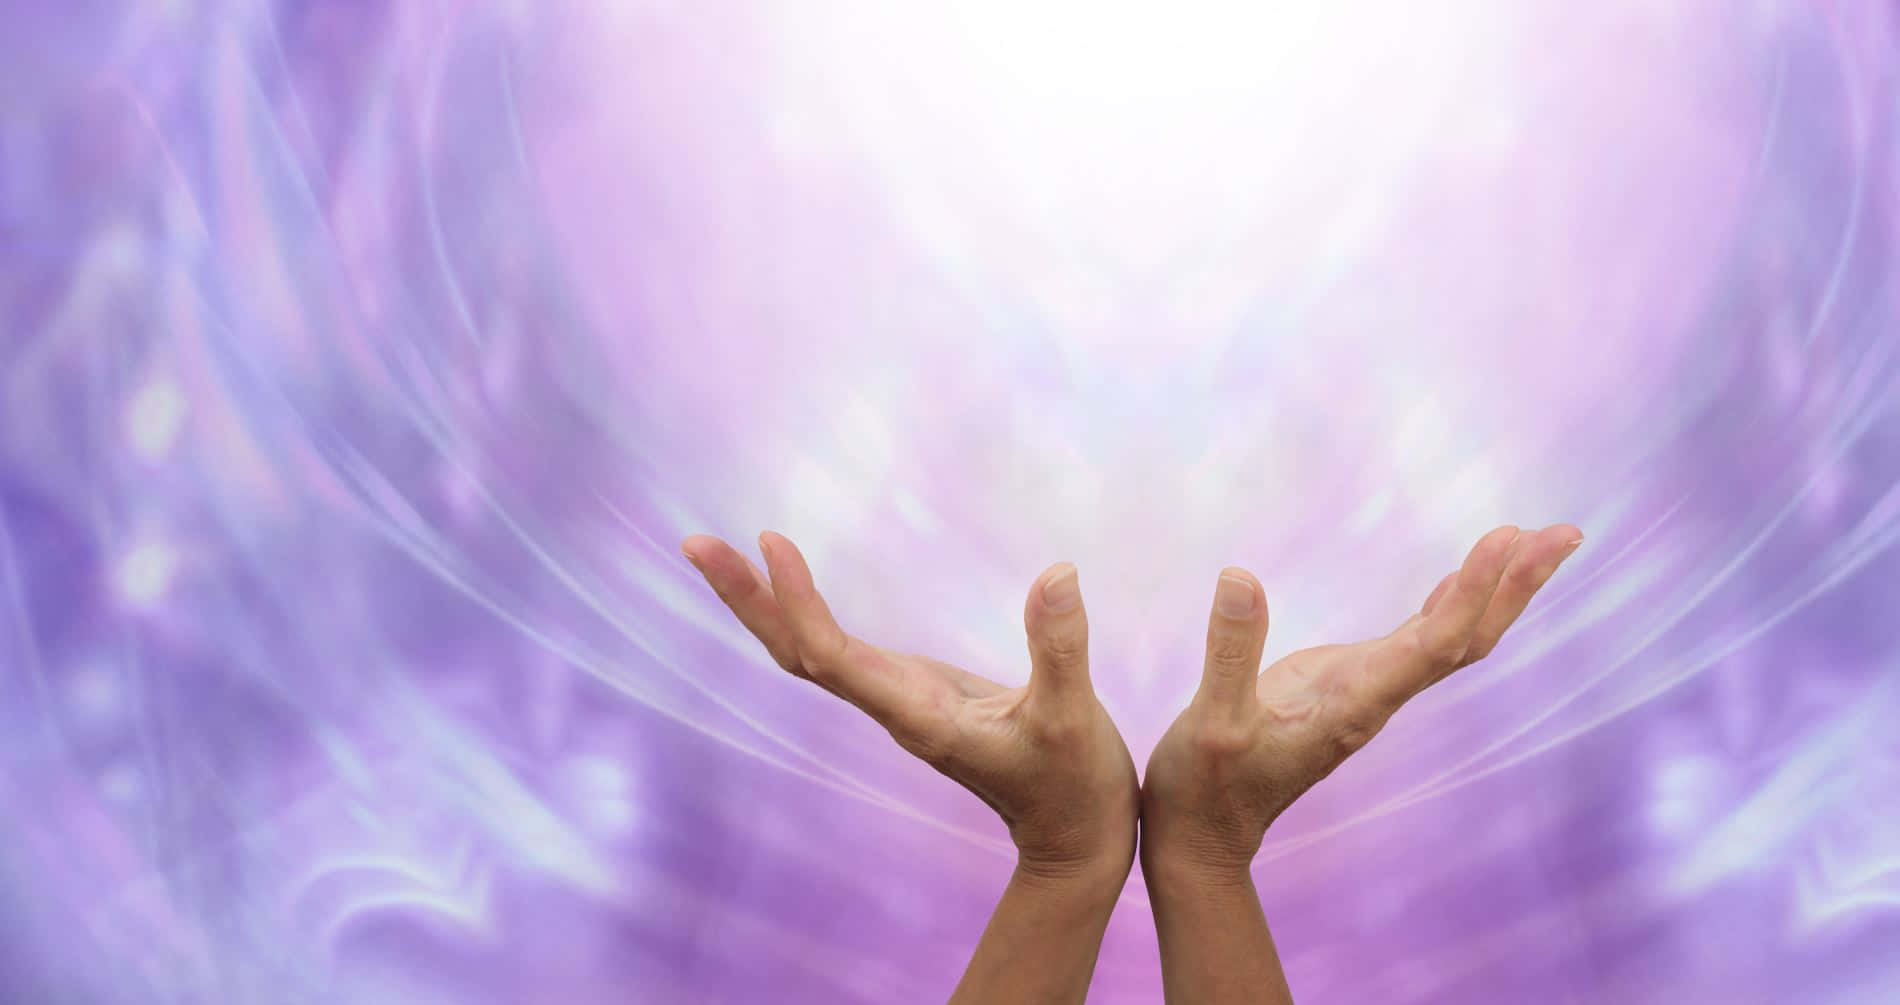 "Reiki Practitioner Channeling Energy through hands" Wallpaper